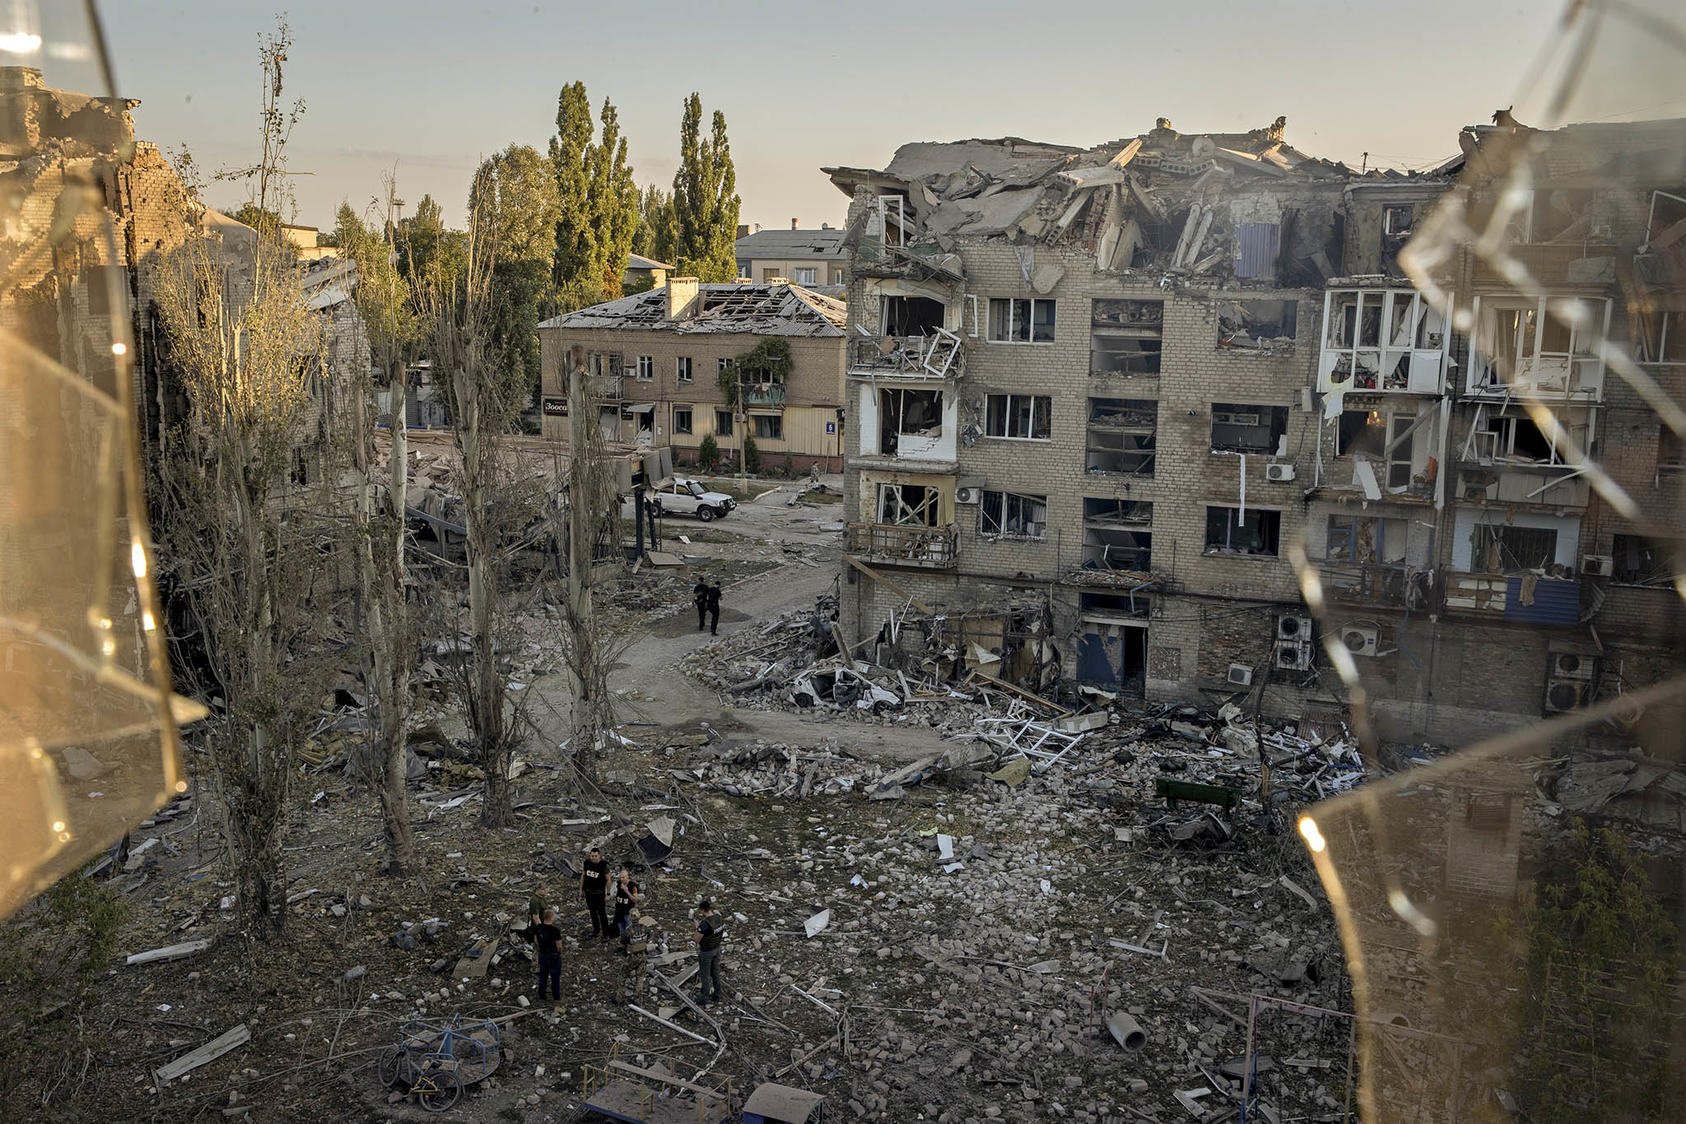 Damage from two Russian missile strikes in the Ukrainian city of Pokrovsk, about 43 miles to the east of the Russian-occupied city of Donetsk and 30 miles from the front line, on Tuesday, Aug. 8, 2023. (Tyler Hicks/The New York Times)